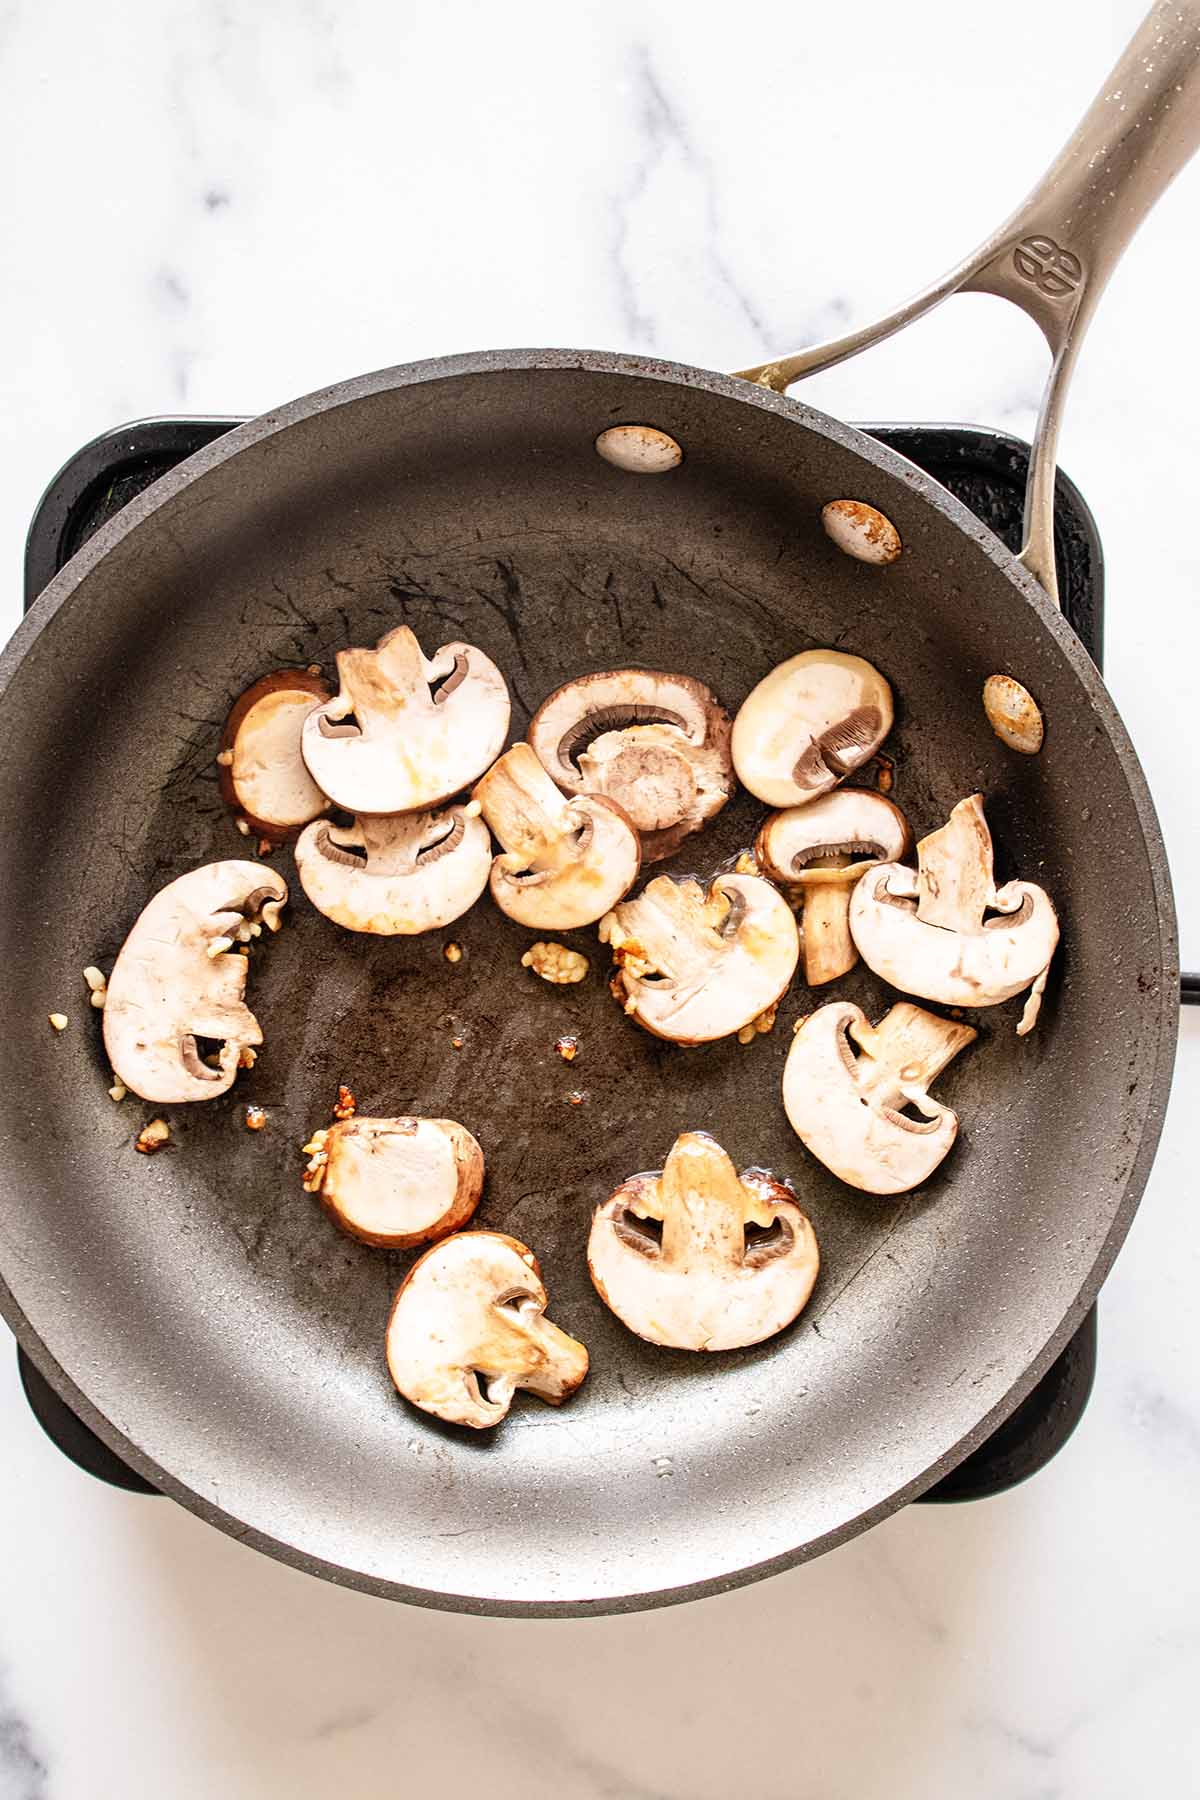 Sliced mushrooms and garlic cooking in a skillet